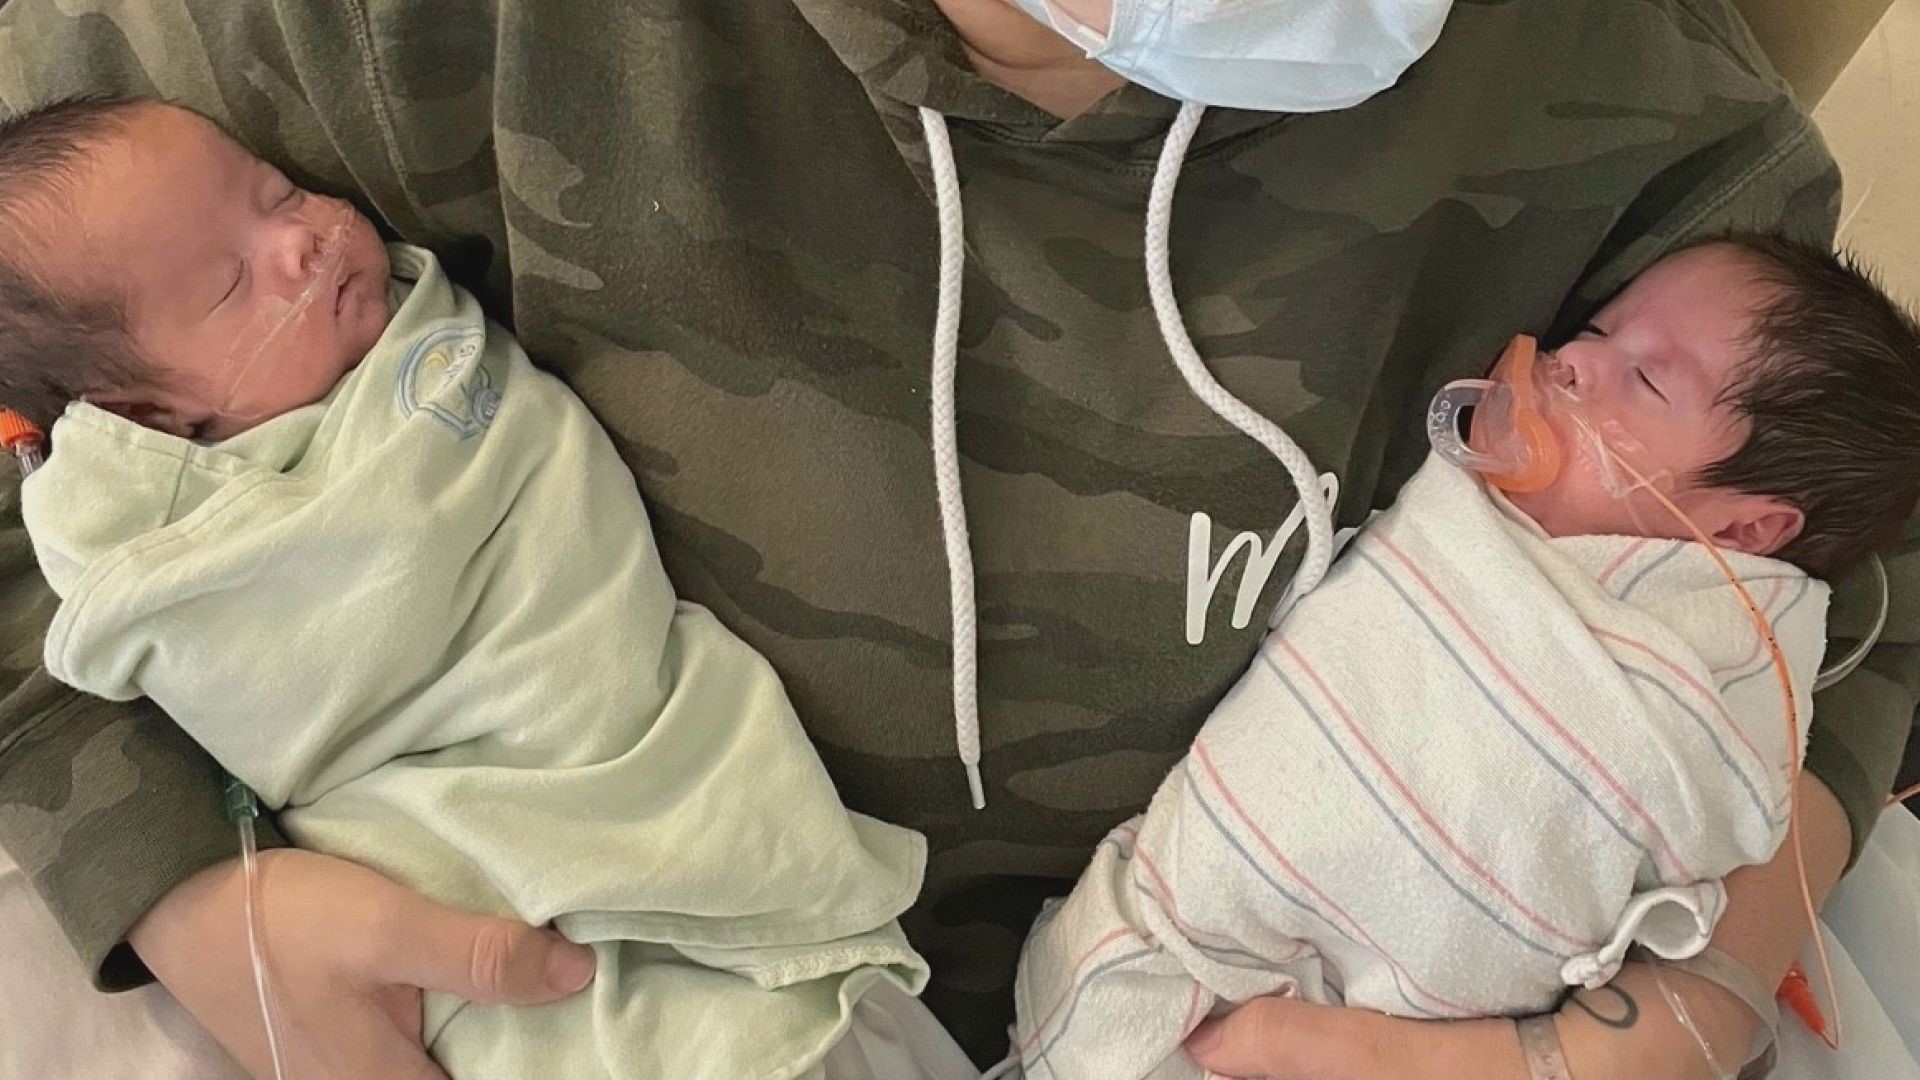 Two-month-old Carter and Garrett Lopez, identical twins, came into the world in a hurry. They were born in December but weren't expected until March.